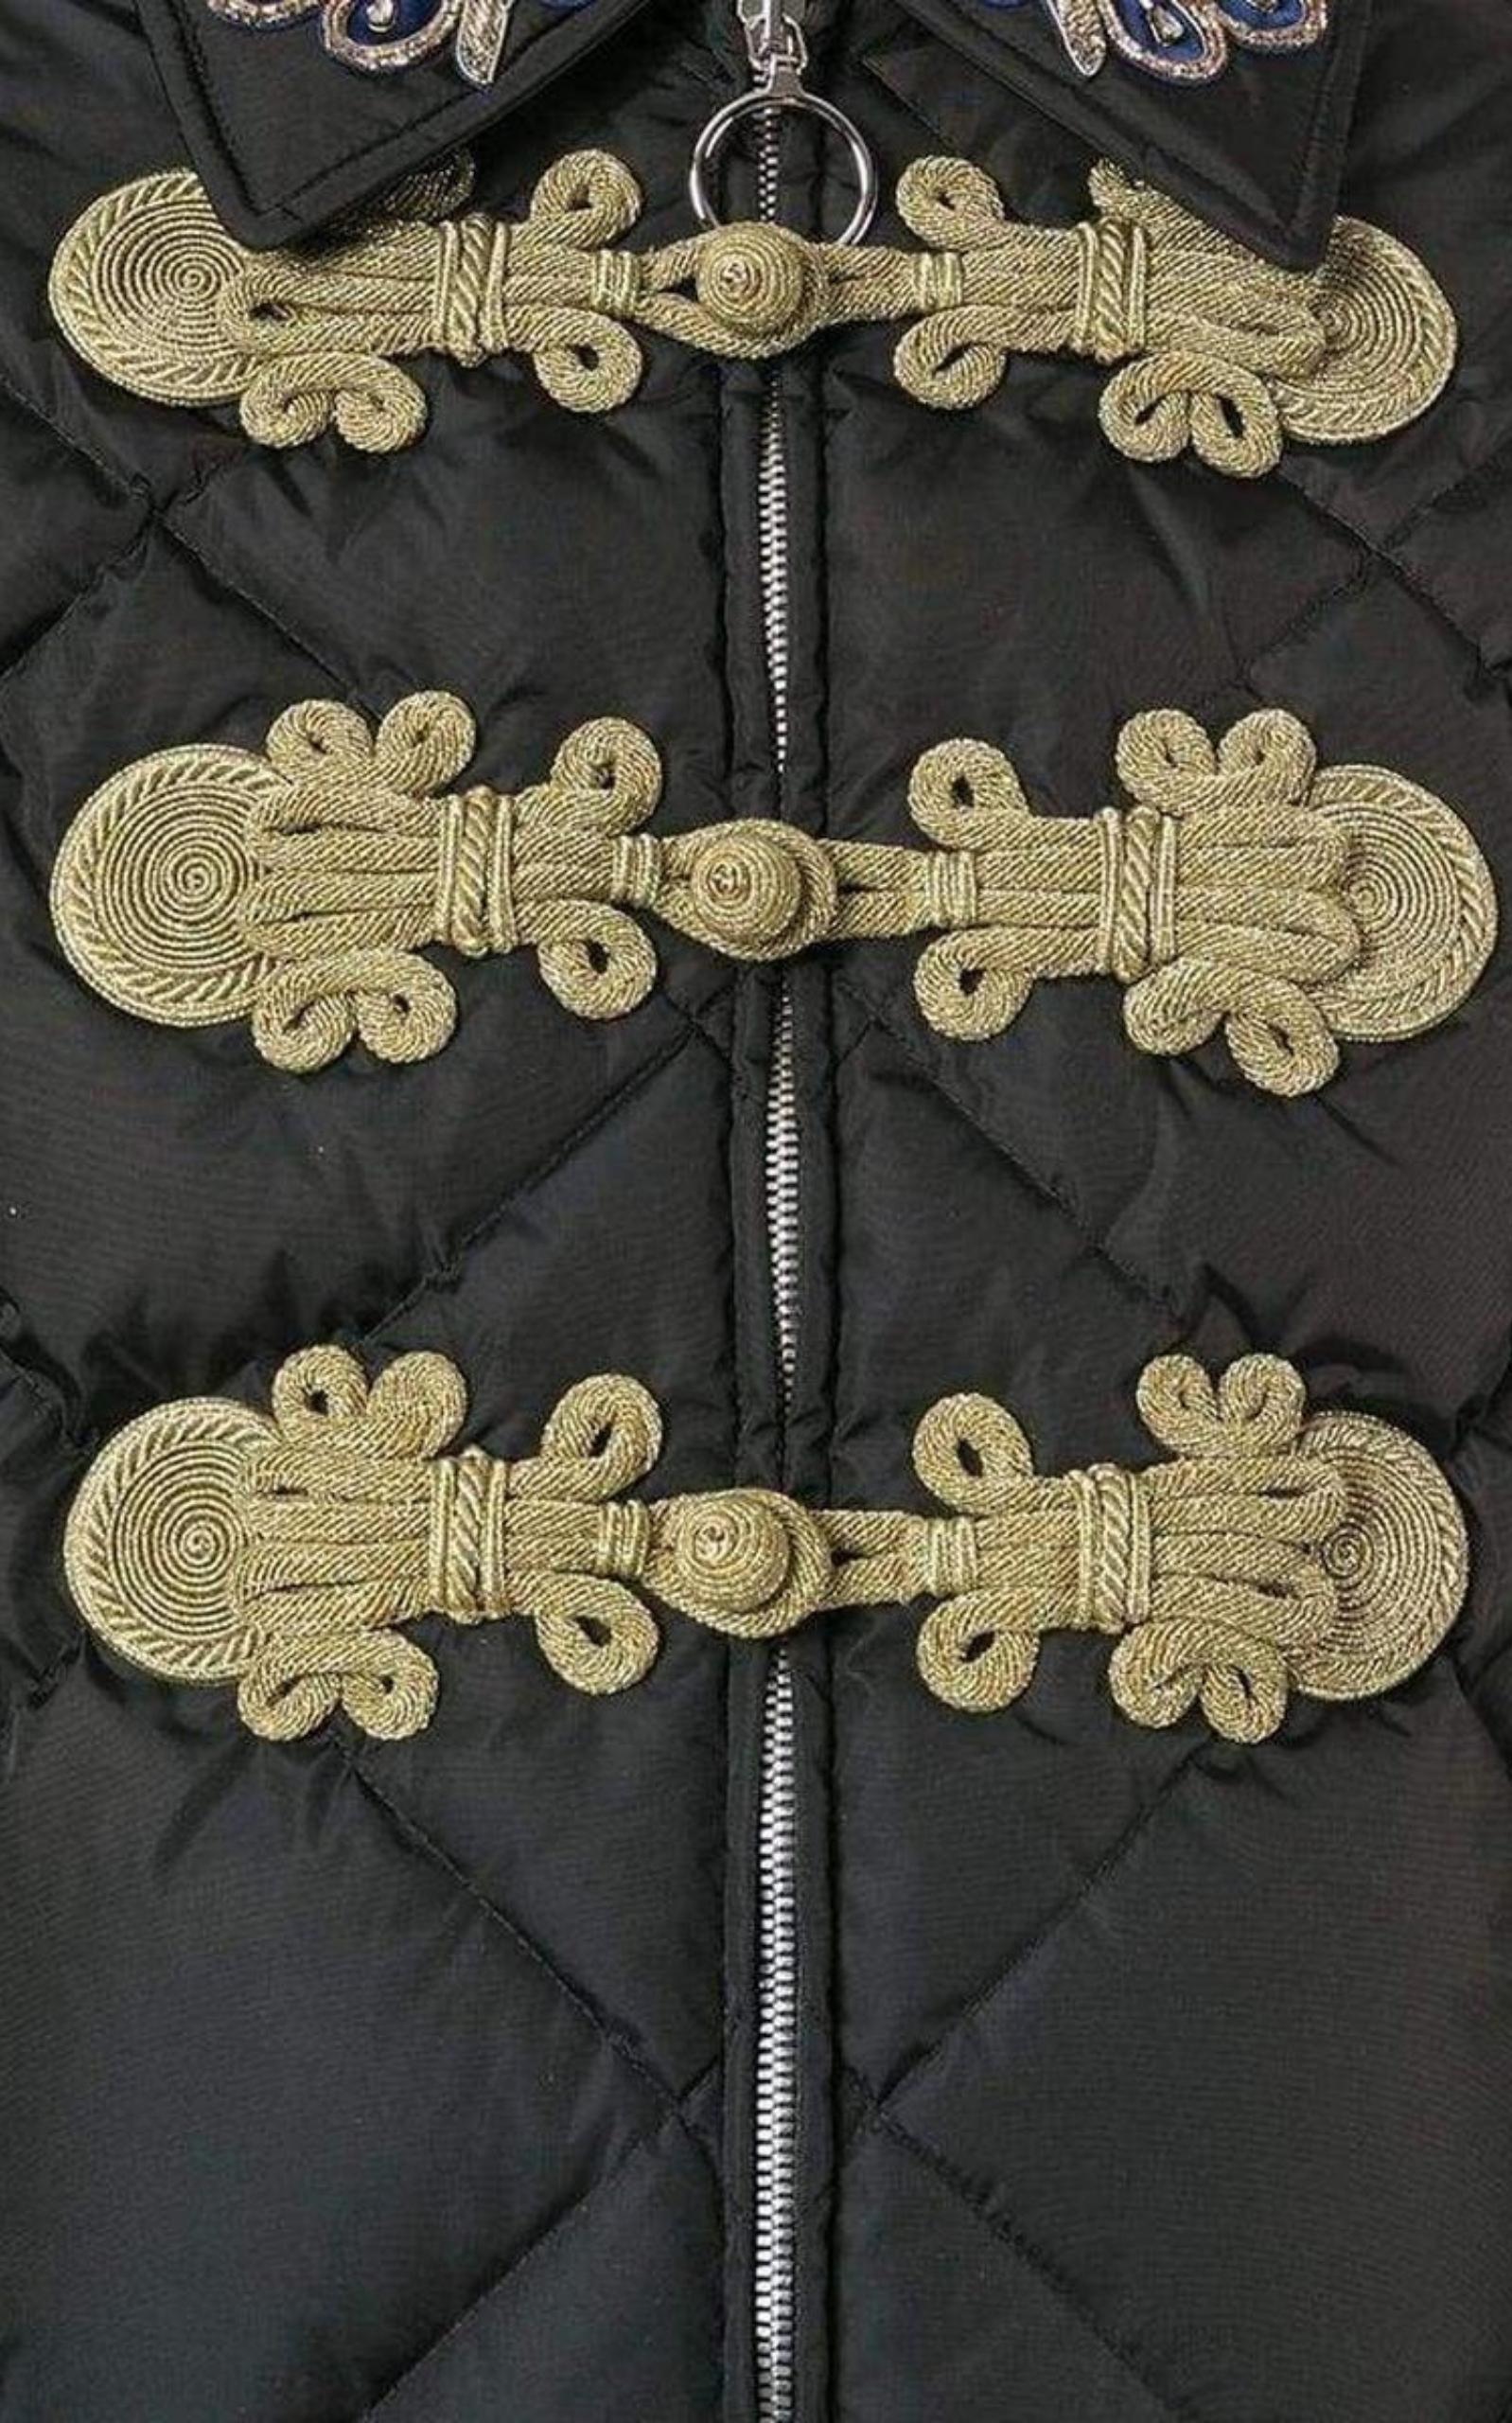  GucciEmbroidered Quilted Bomber Jacket - Runway Catalog